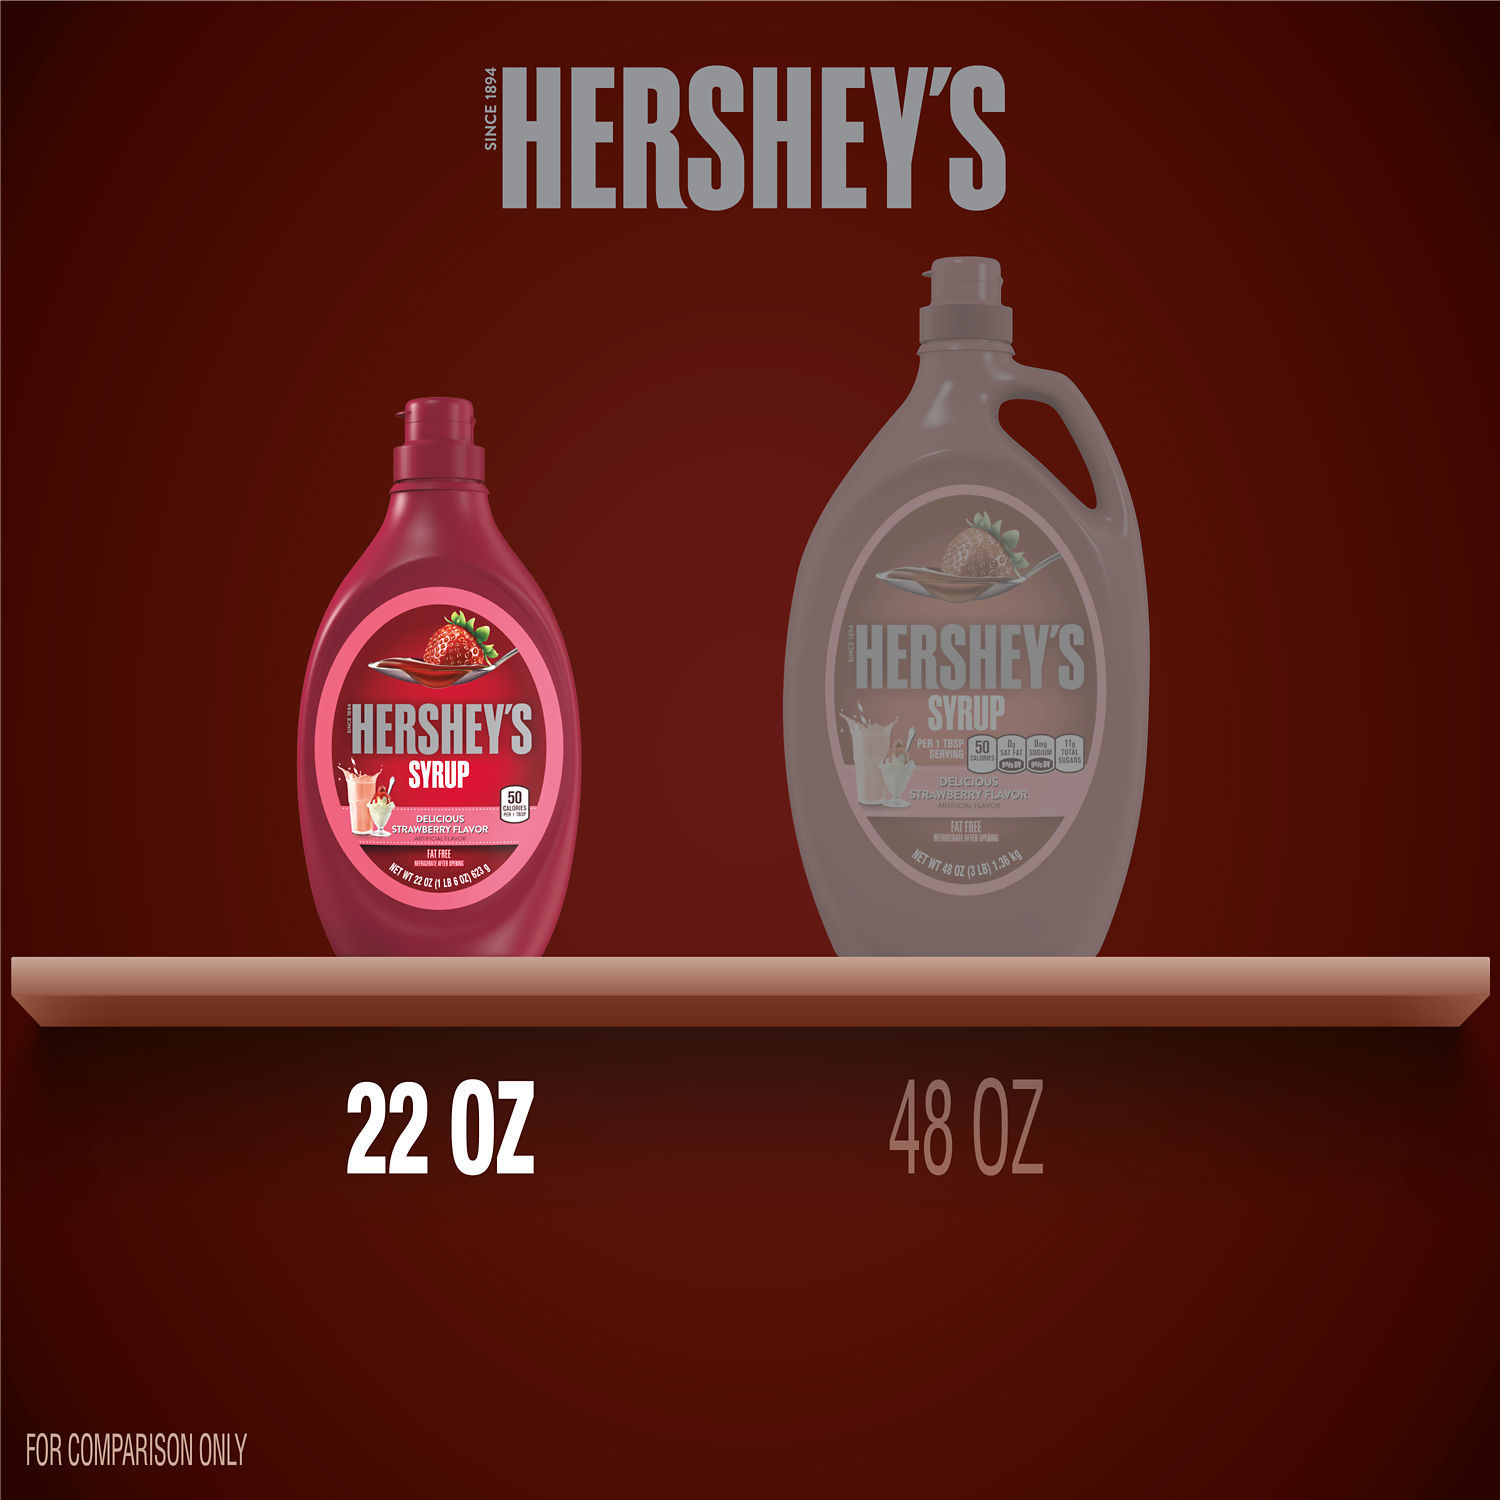 Hershey's Strawberry Flavored Syrup, Bottle 22 oz - image 3 of 5